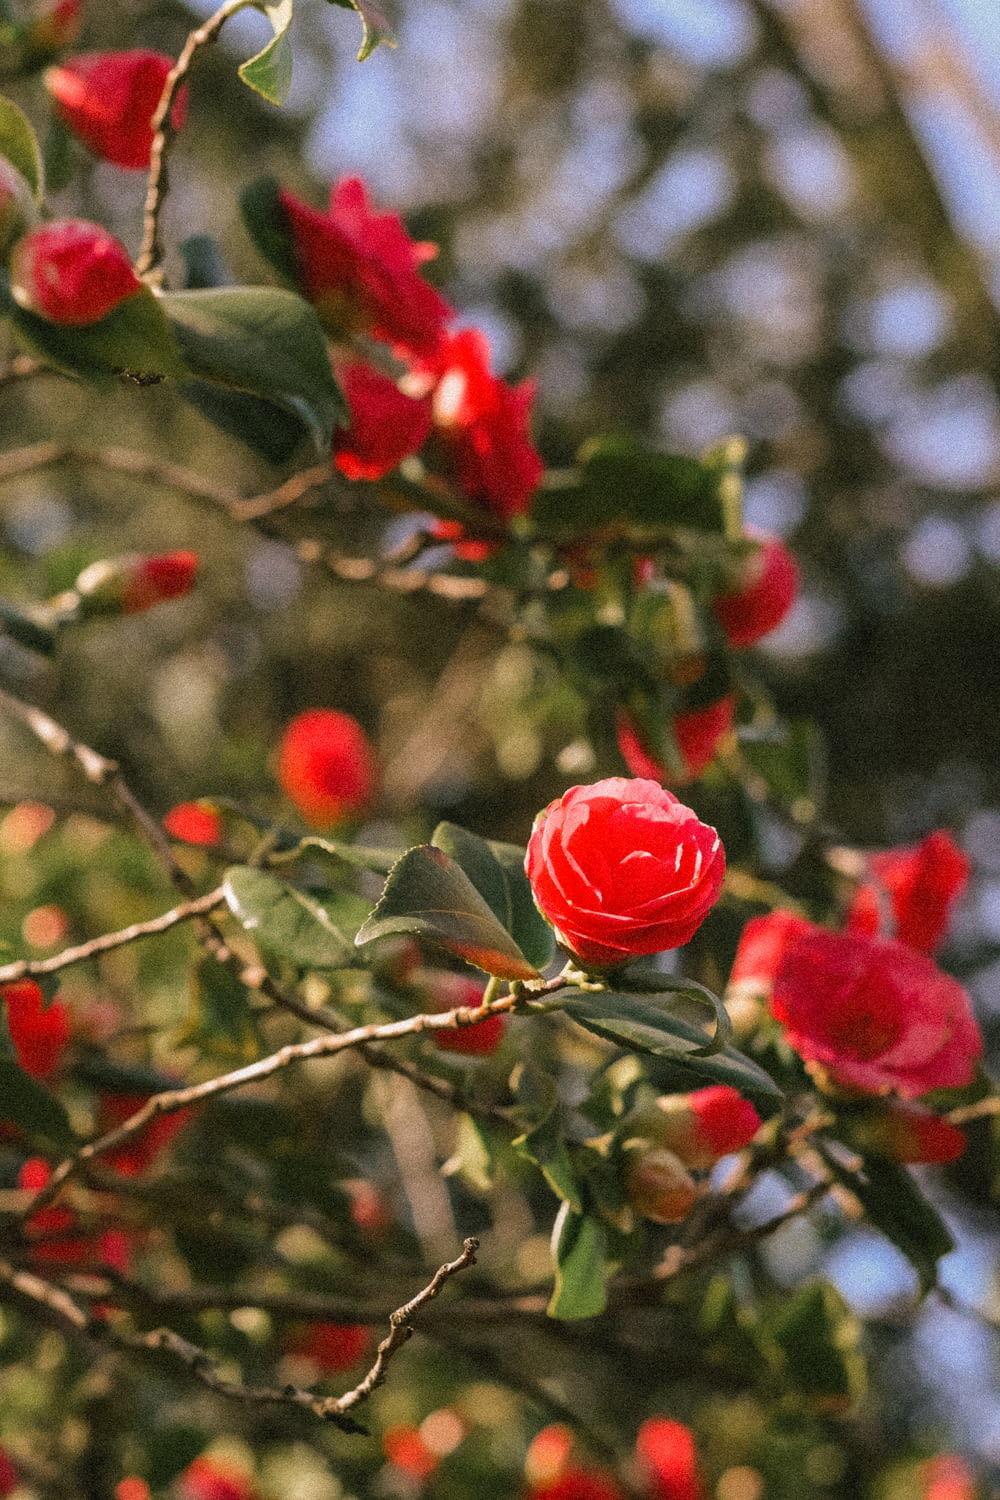 a bush with red flowers and green leaves